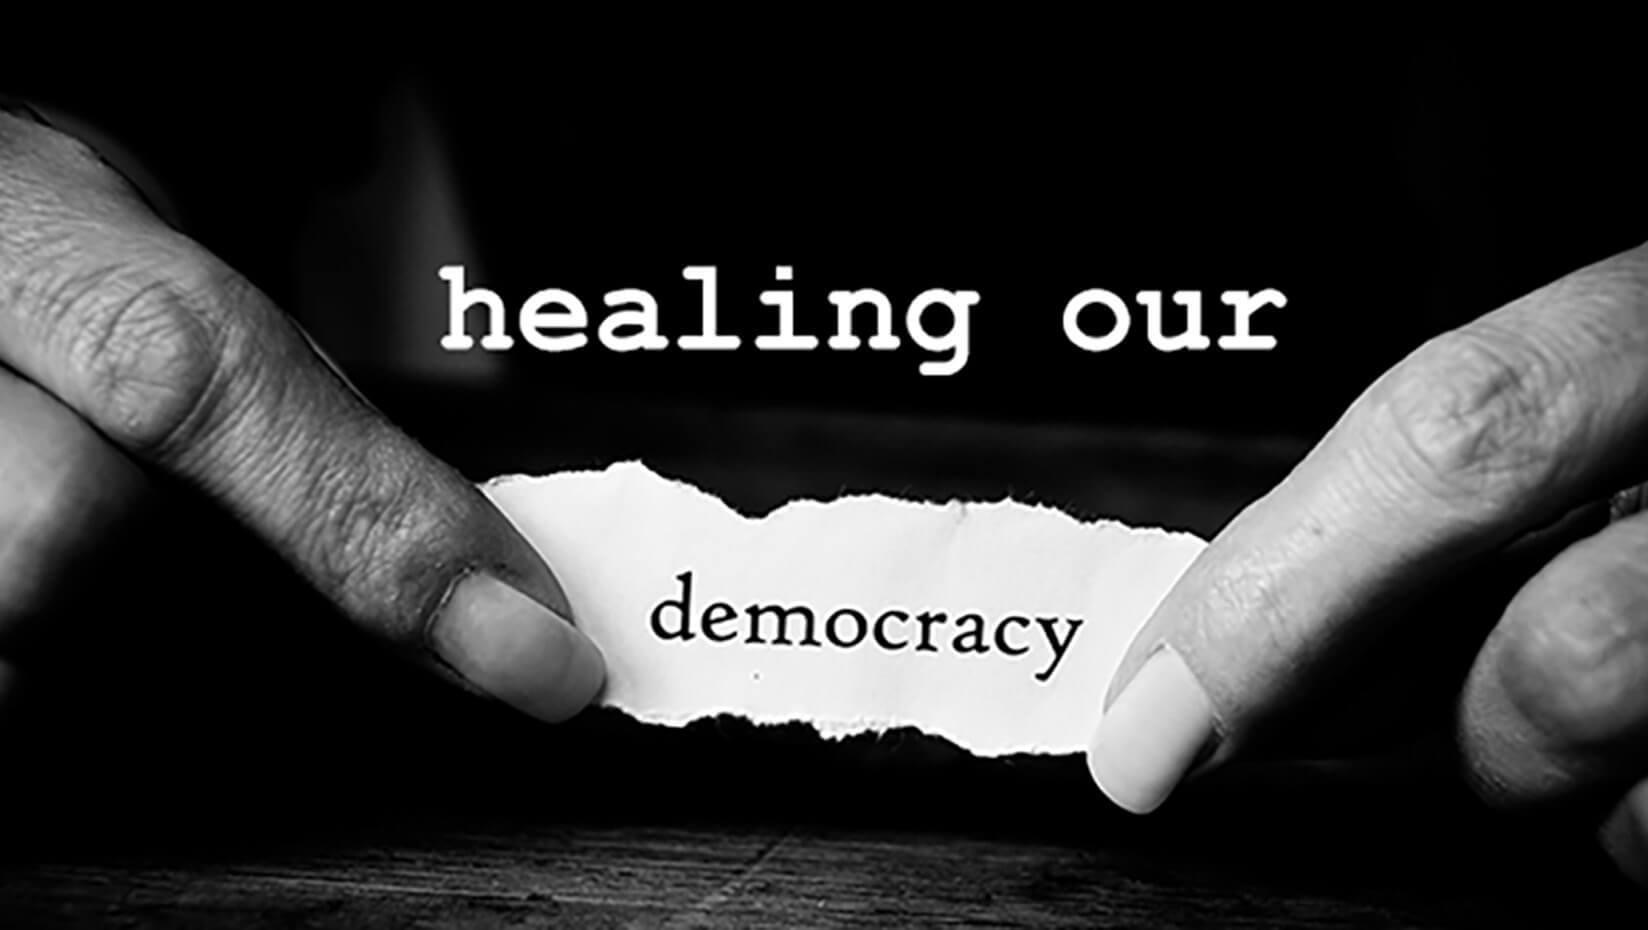 Healing our democracy